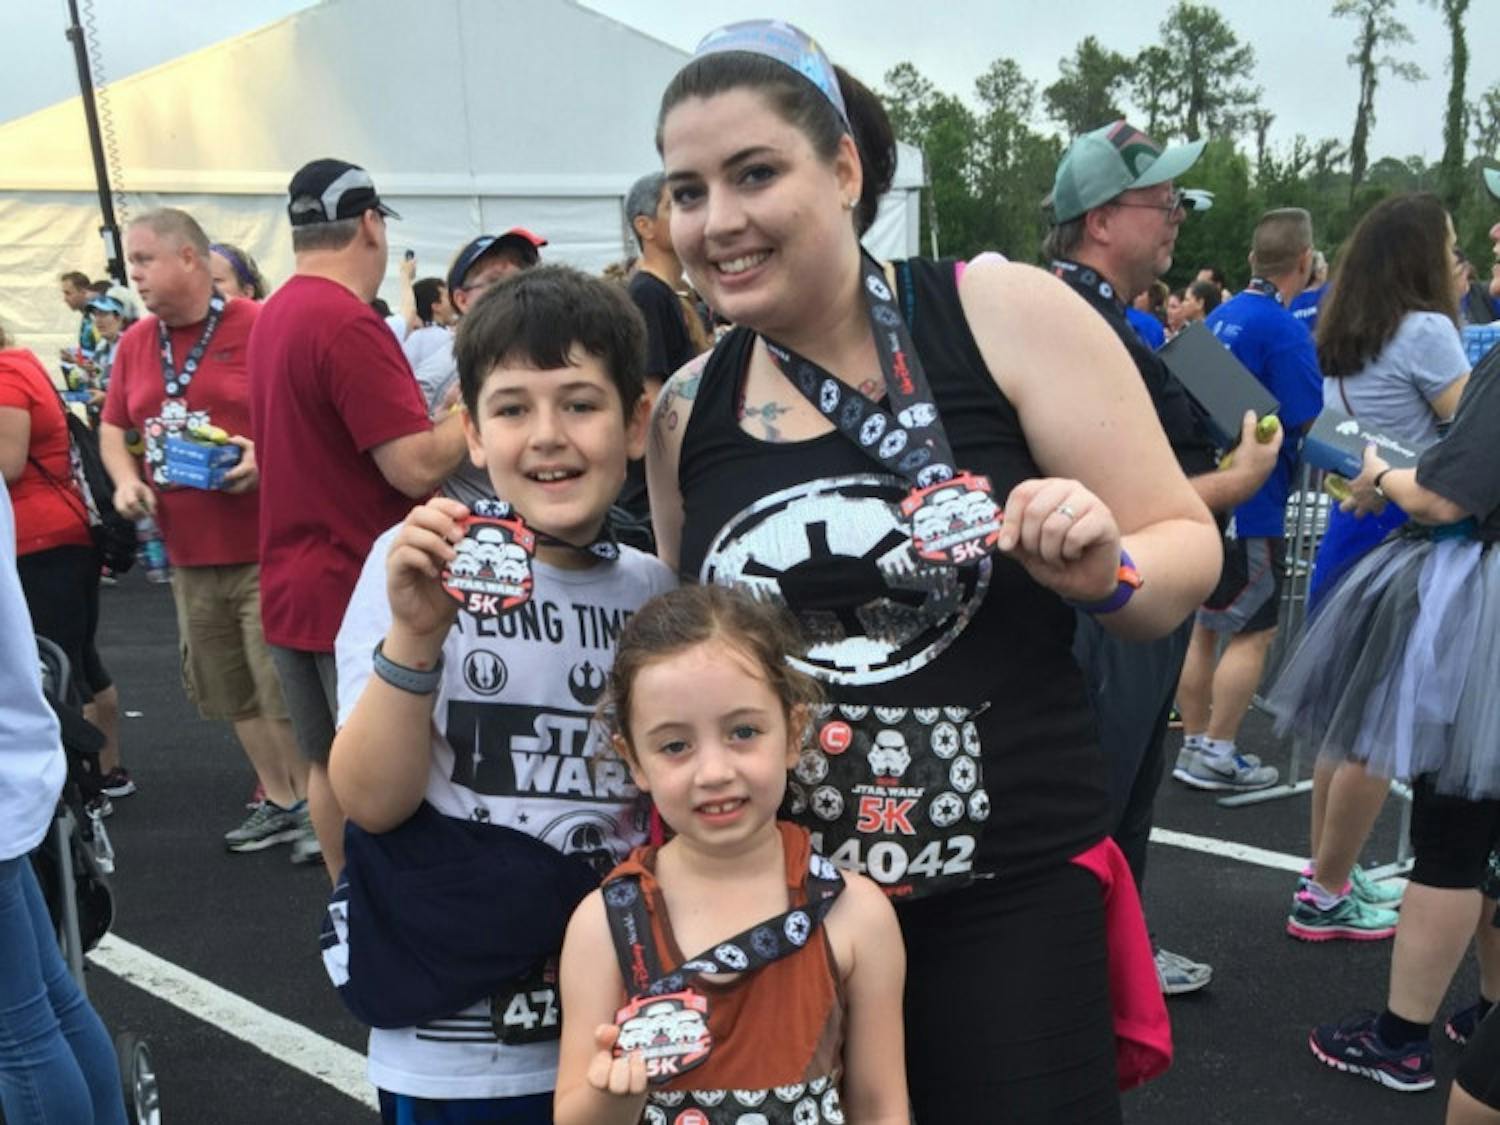 Jennifer Ford, a 32-year-old senior graphic designer for UF Online, is running to raise money for Noah’s Light Foundation, which aims to find a cure for pediatric brain cancer. Though she ran a 5K in April, she said this will be her longest race. 